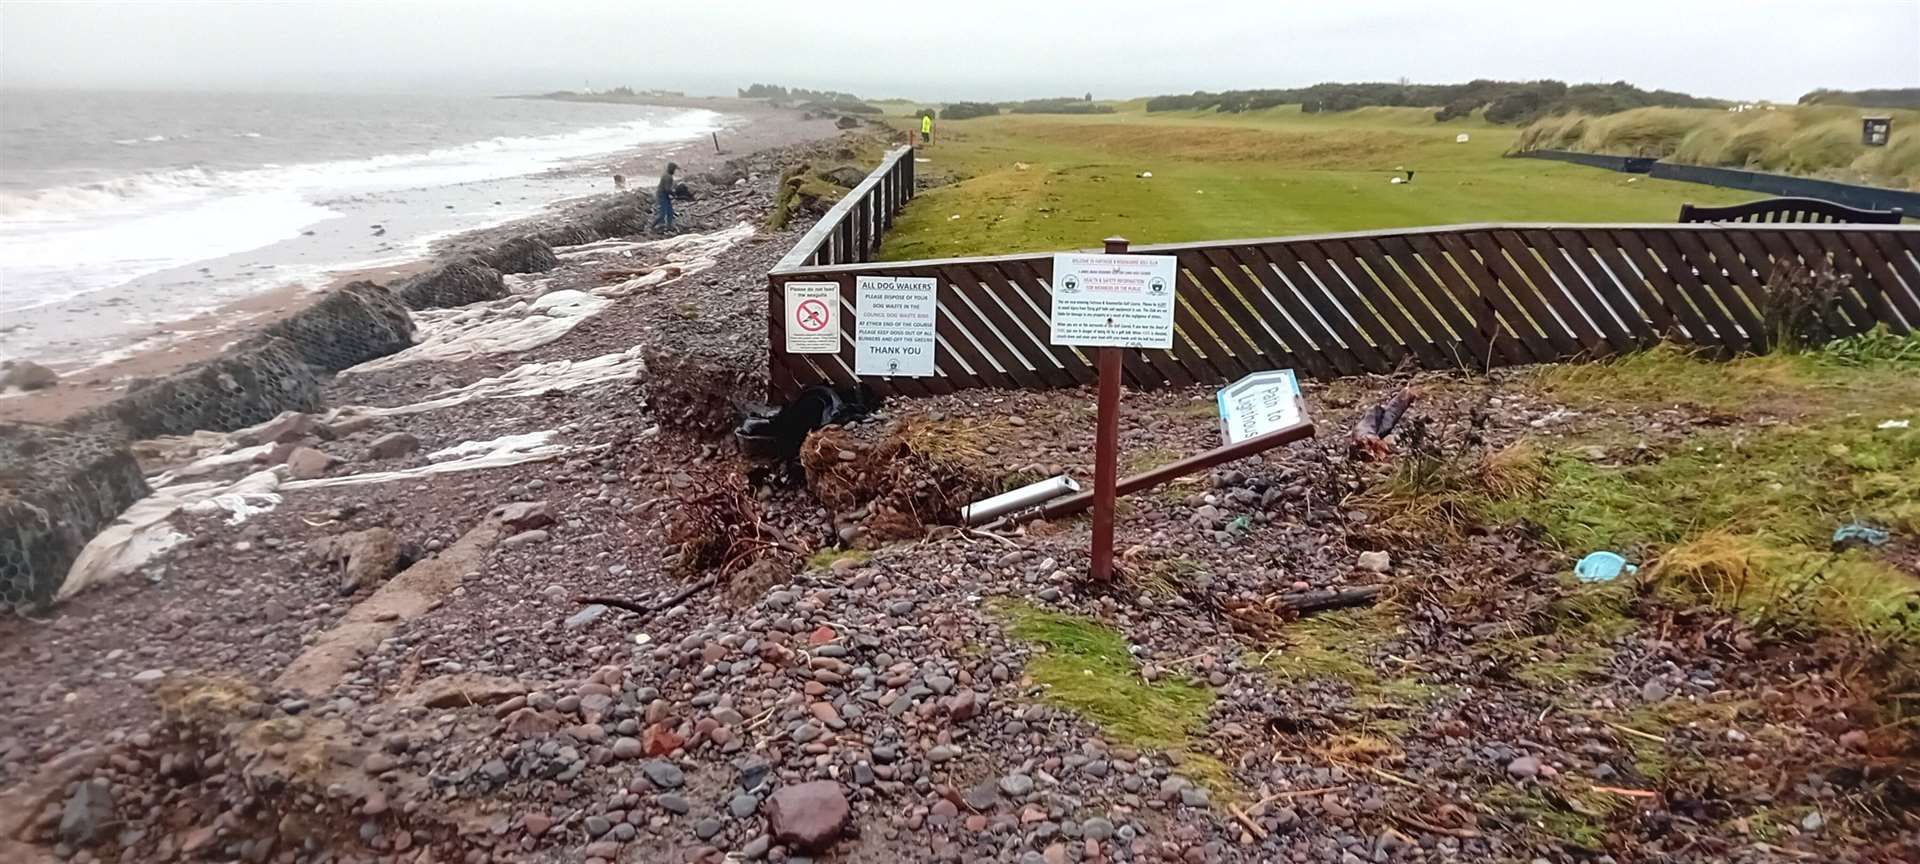 Fortrose and Rosemarkie Golf Club are looking to raise six figures to help combat coastal erosion around the course. Pictures: Fortrose and Rosemarkie Golf Club